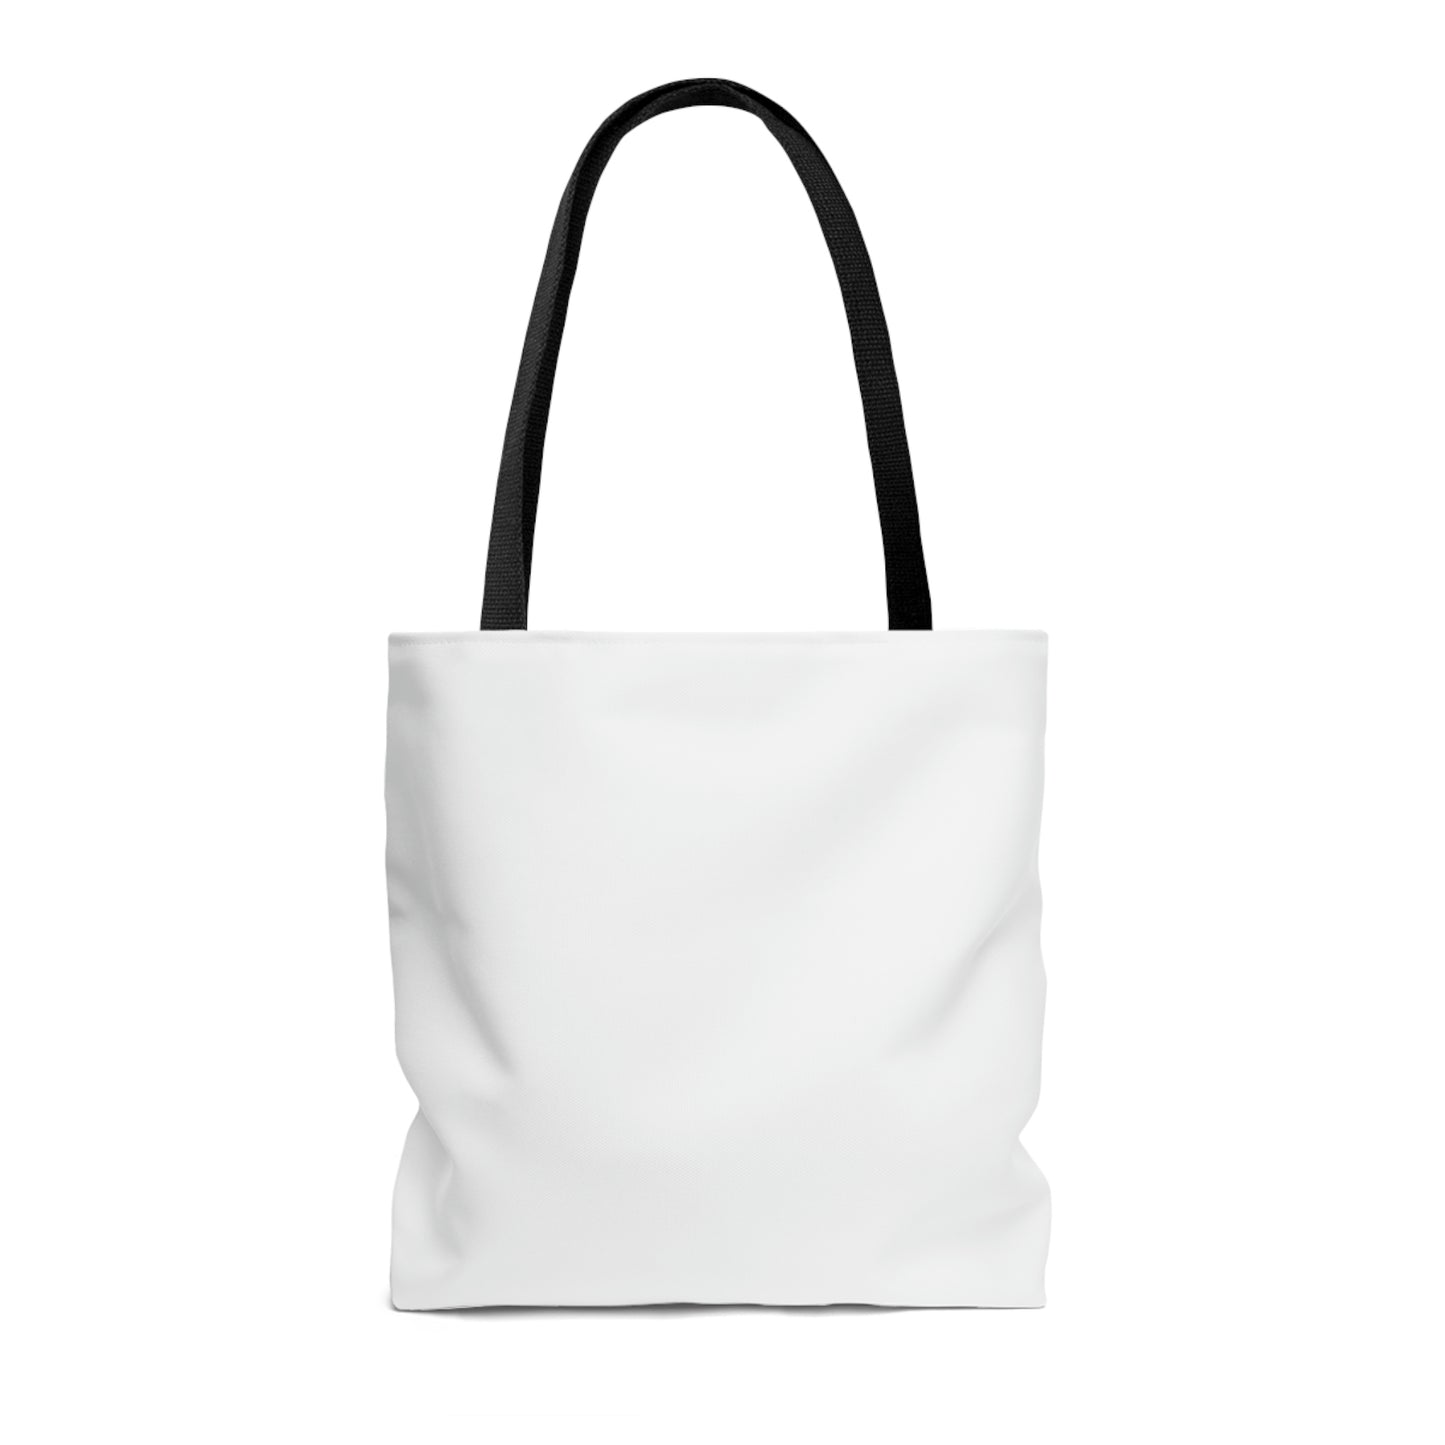 The Inspirational Element" Tote Bag